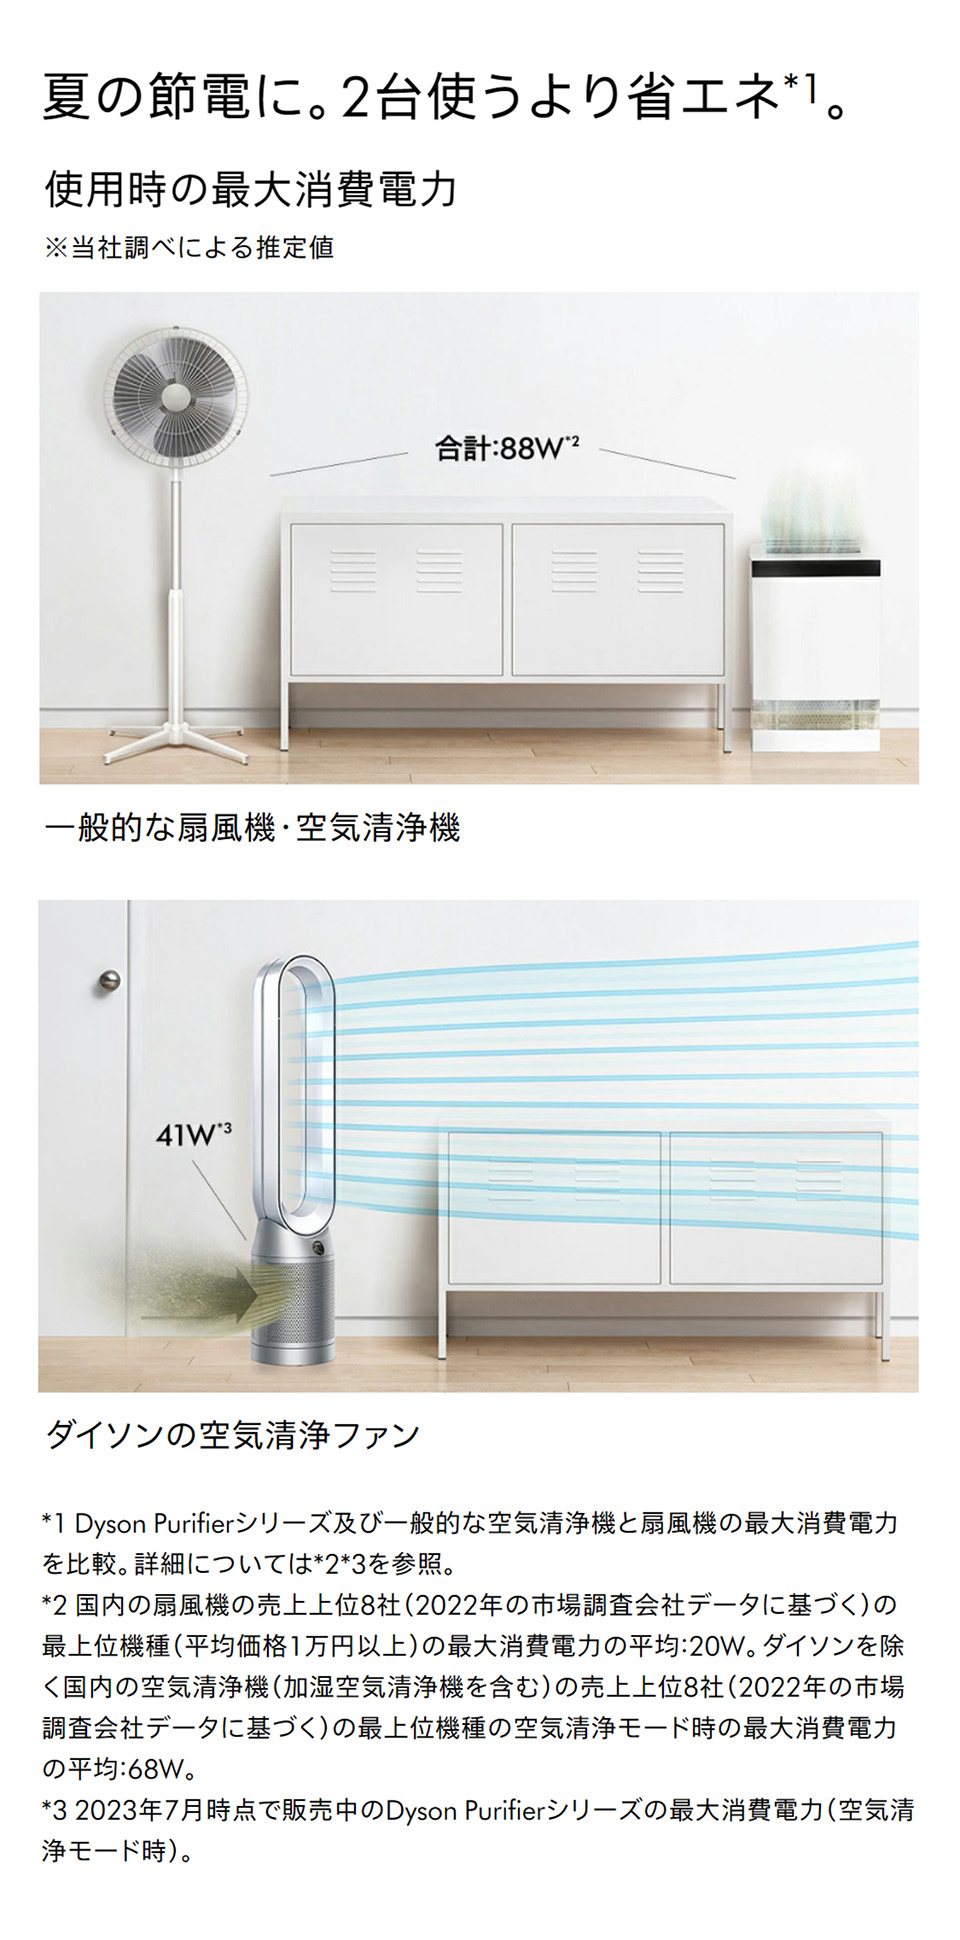 Dyson Purifier Cool TP07WS 空気清浄機 扇風機